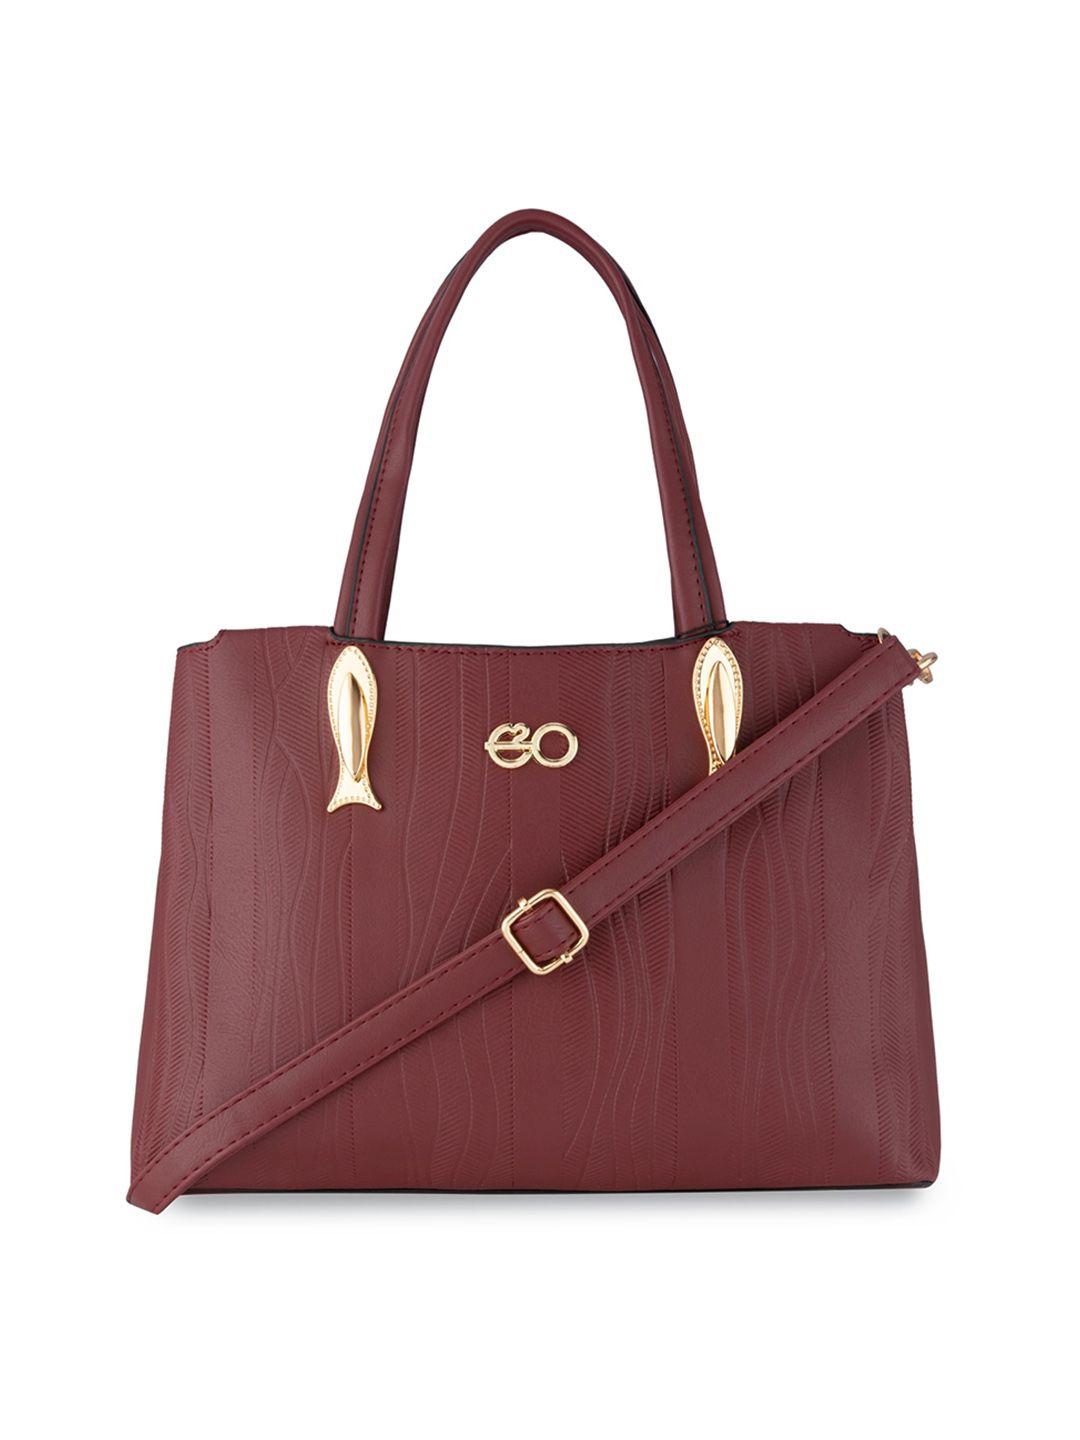 e2o textured structured handheld bag